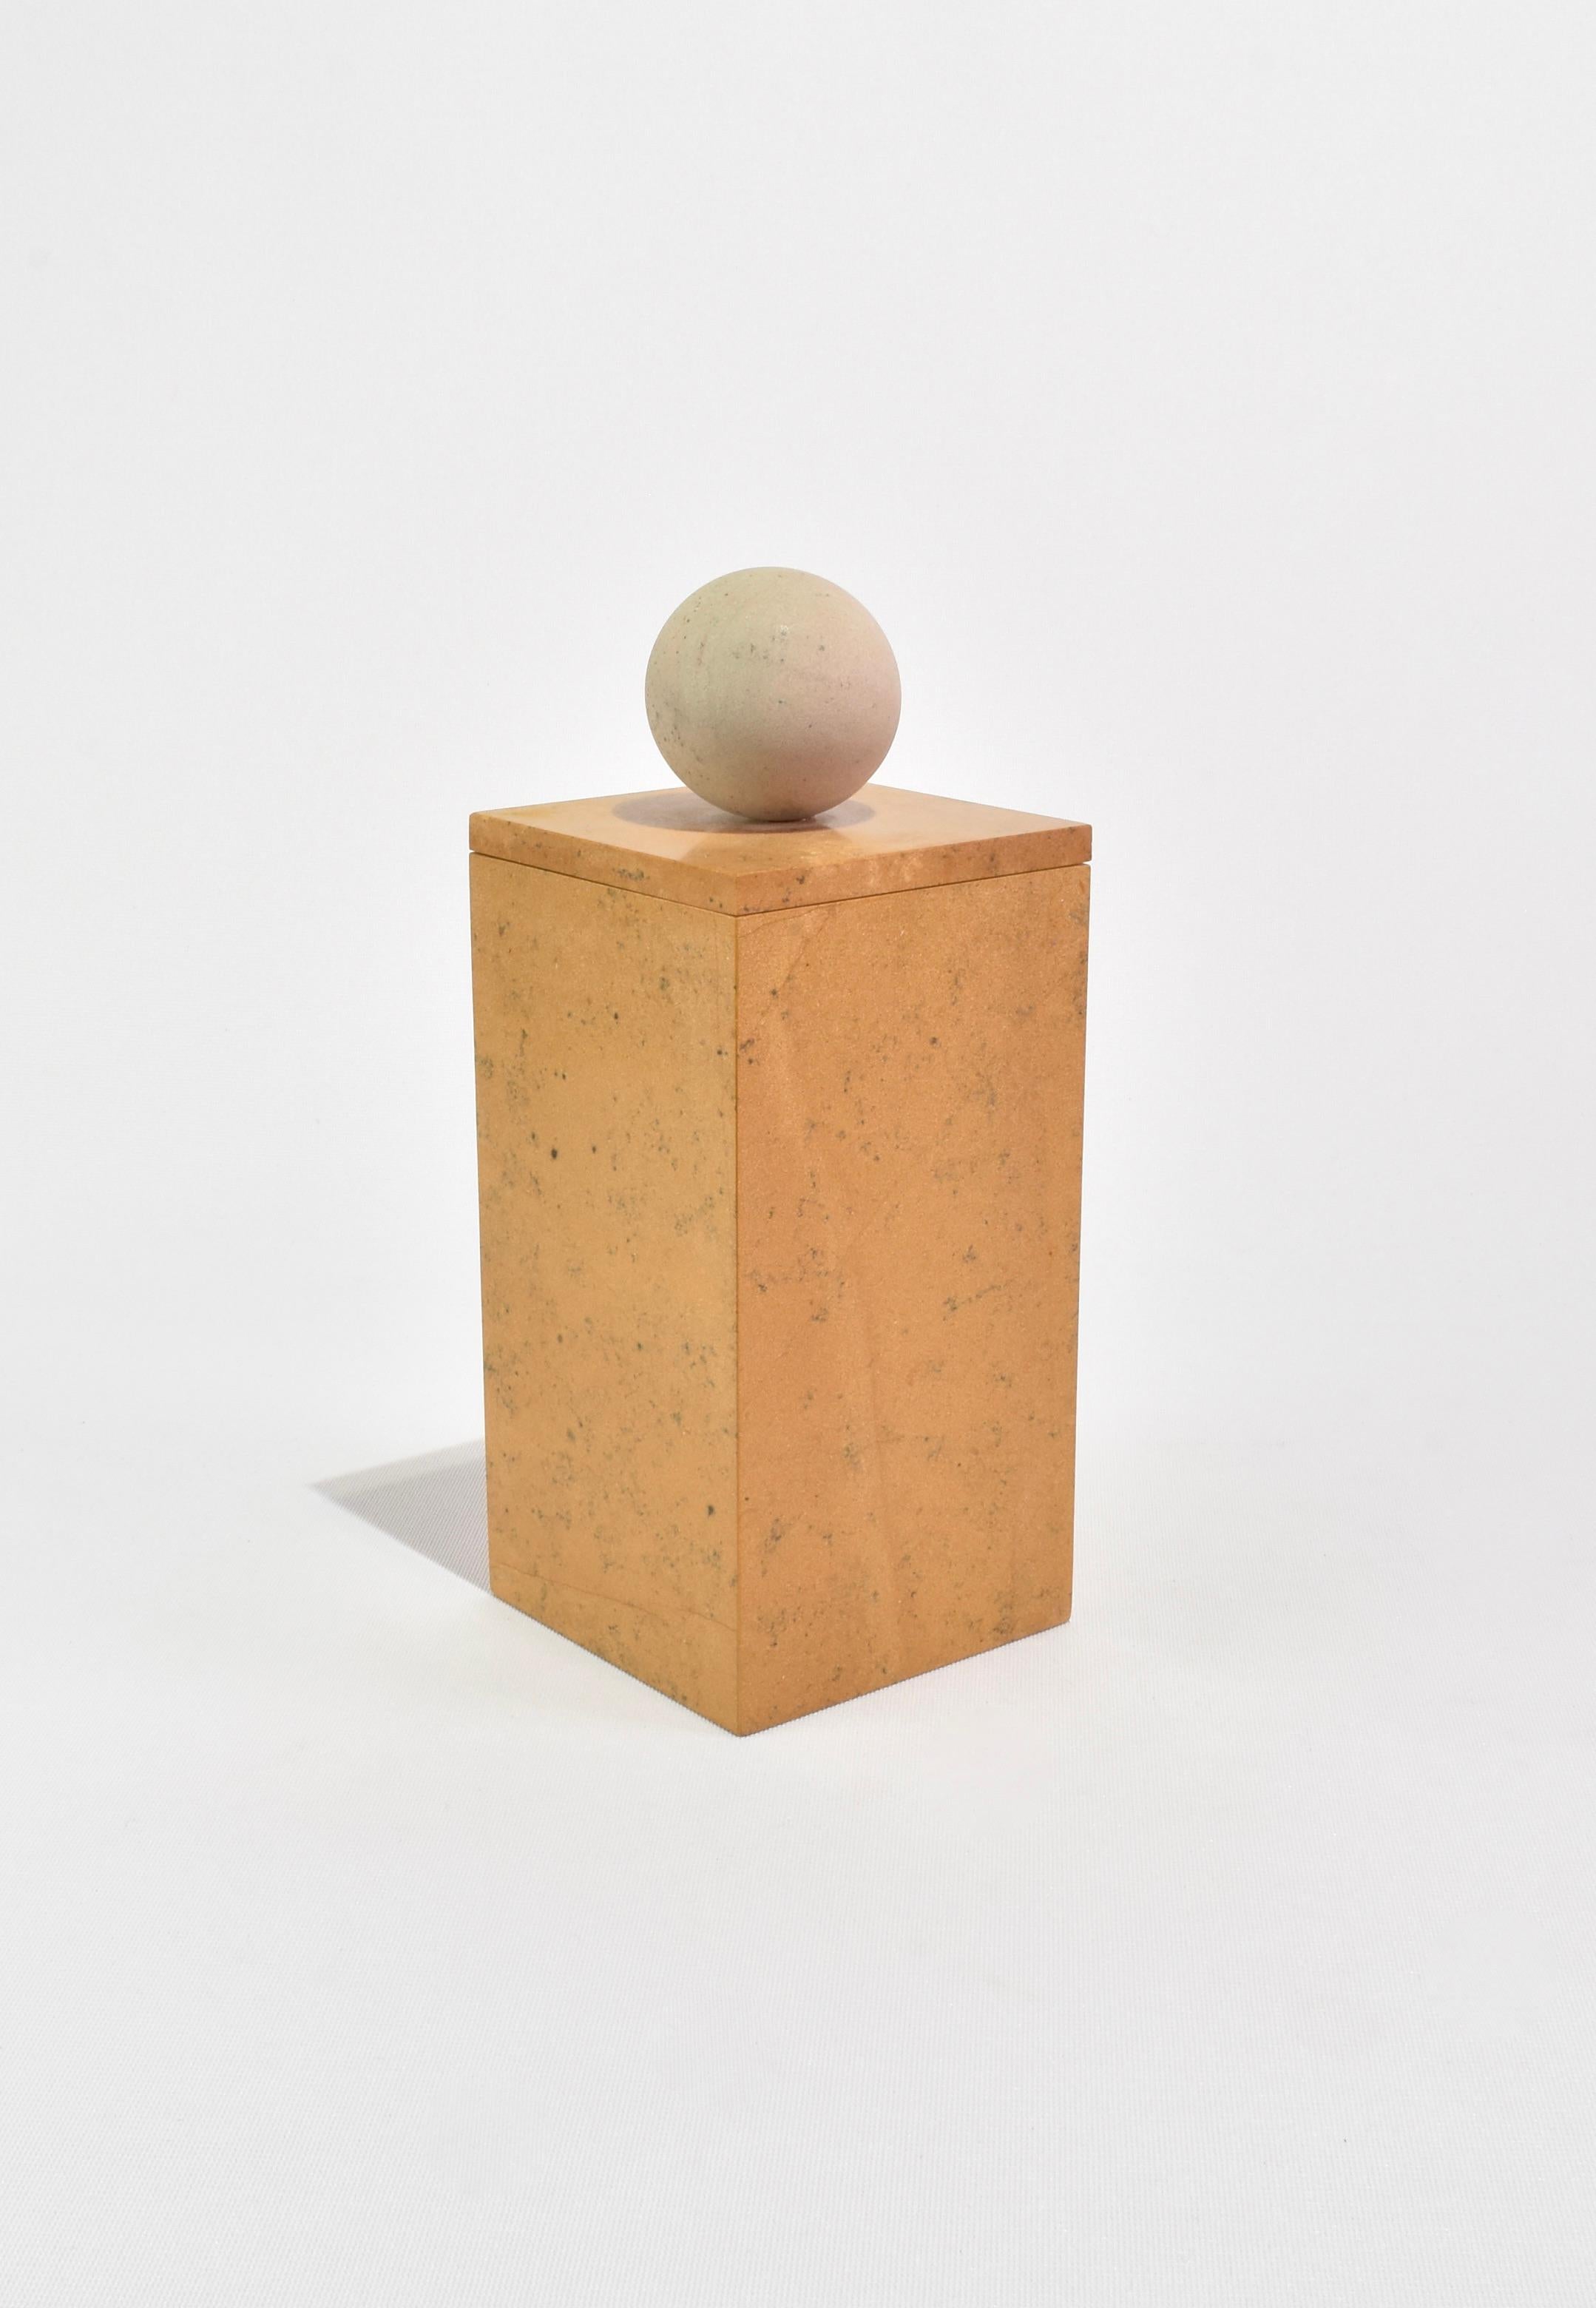 Tall Curio Box by Casa Shop in Yellow Jaisalmer with Beige Sandstone. Inspired by a favorite vintage find, each box features a polished rectangular base with a sphere handle. Handmade by artisans in India.

Use it to hide away an array of cherished